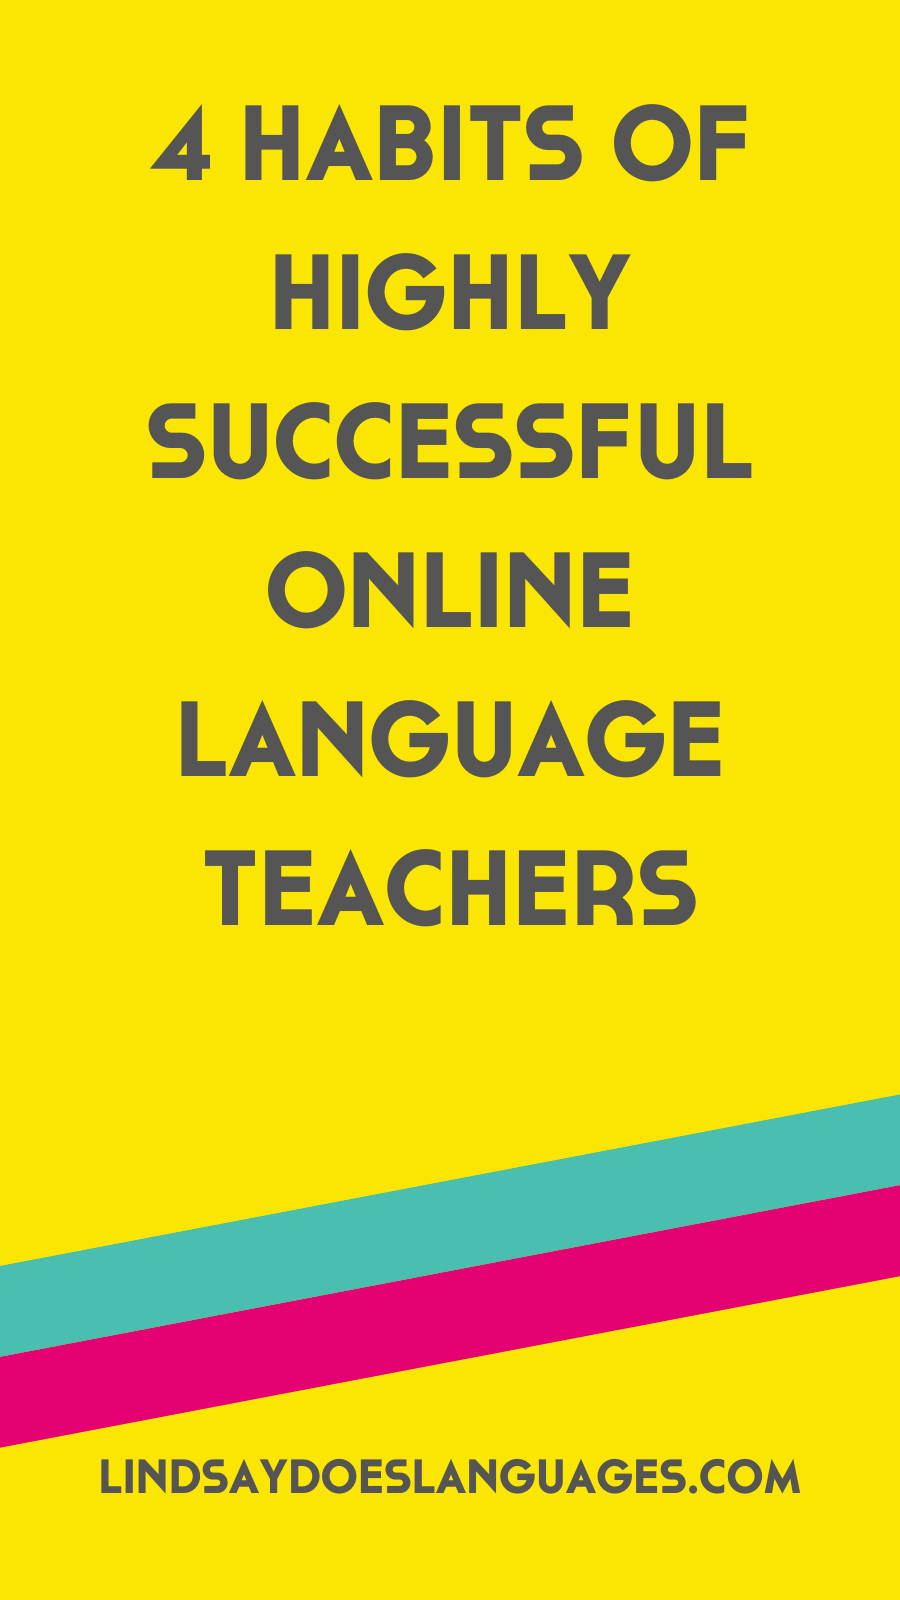 Habits of highly successful online language teachers aren't some mythical unattainable thing. It's easy when you know what they are.